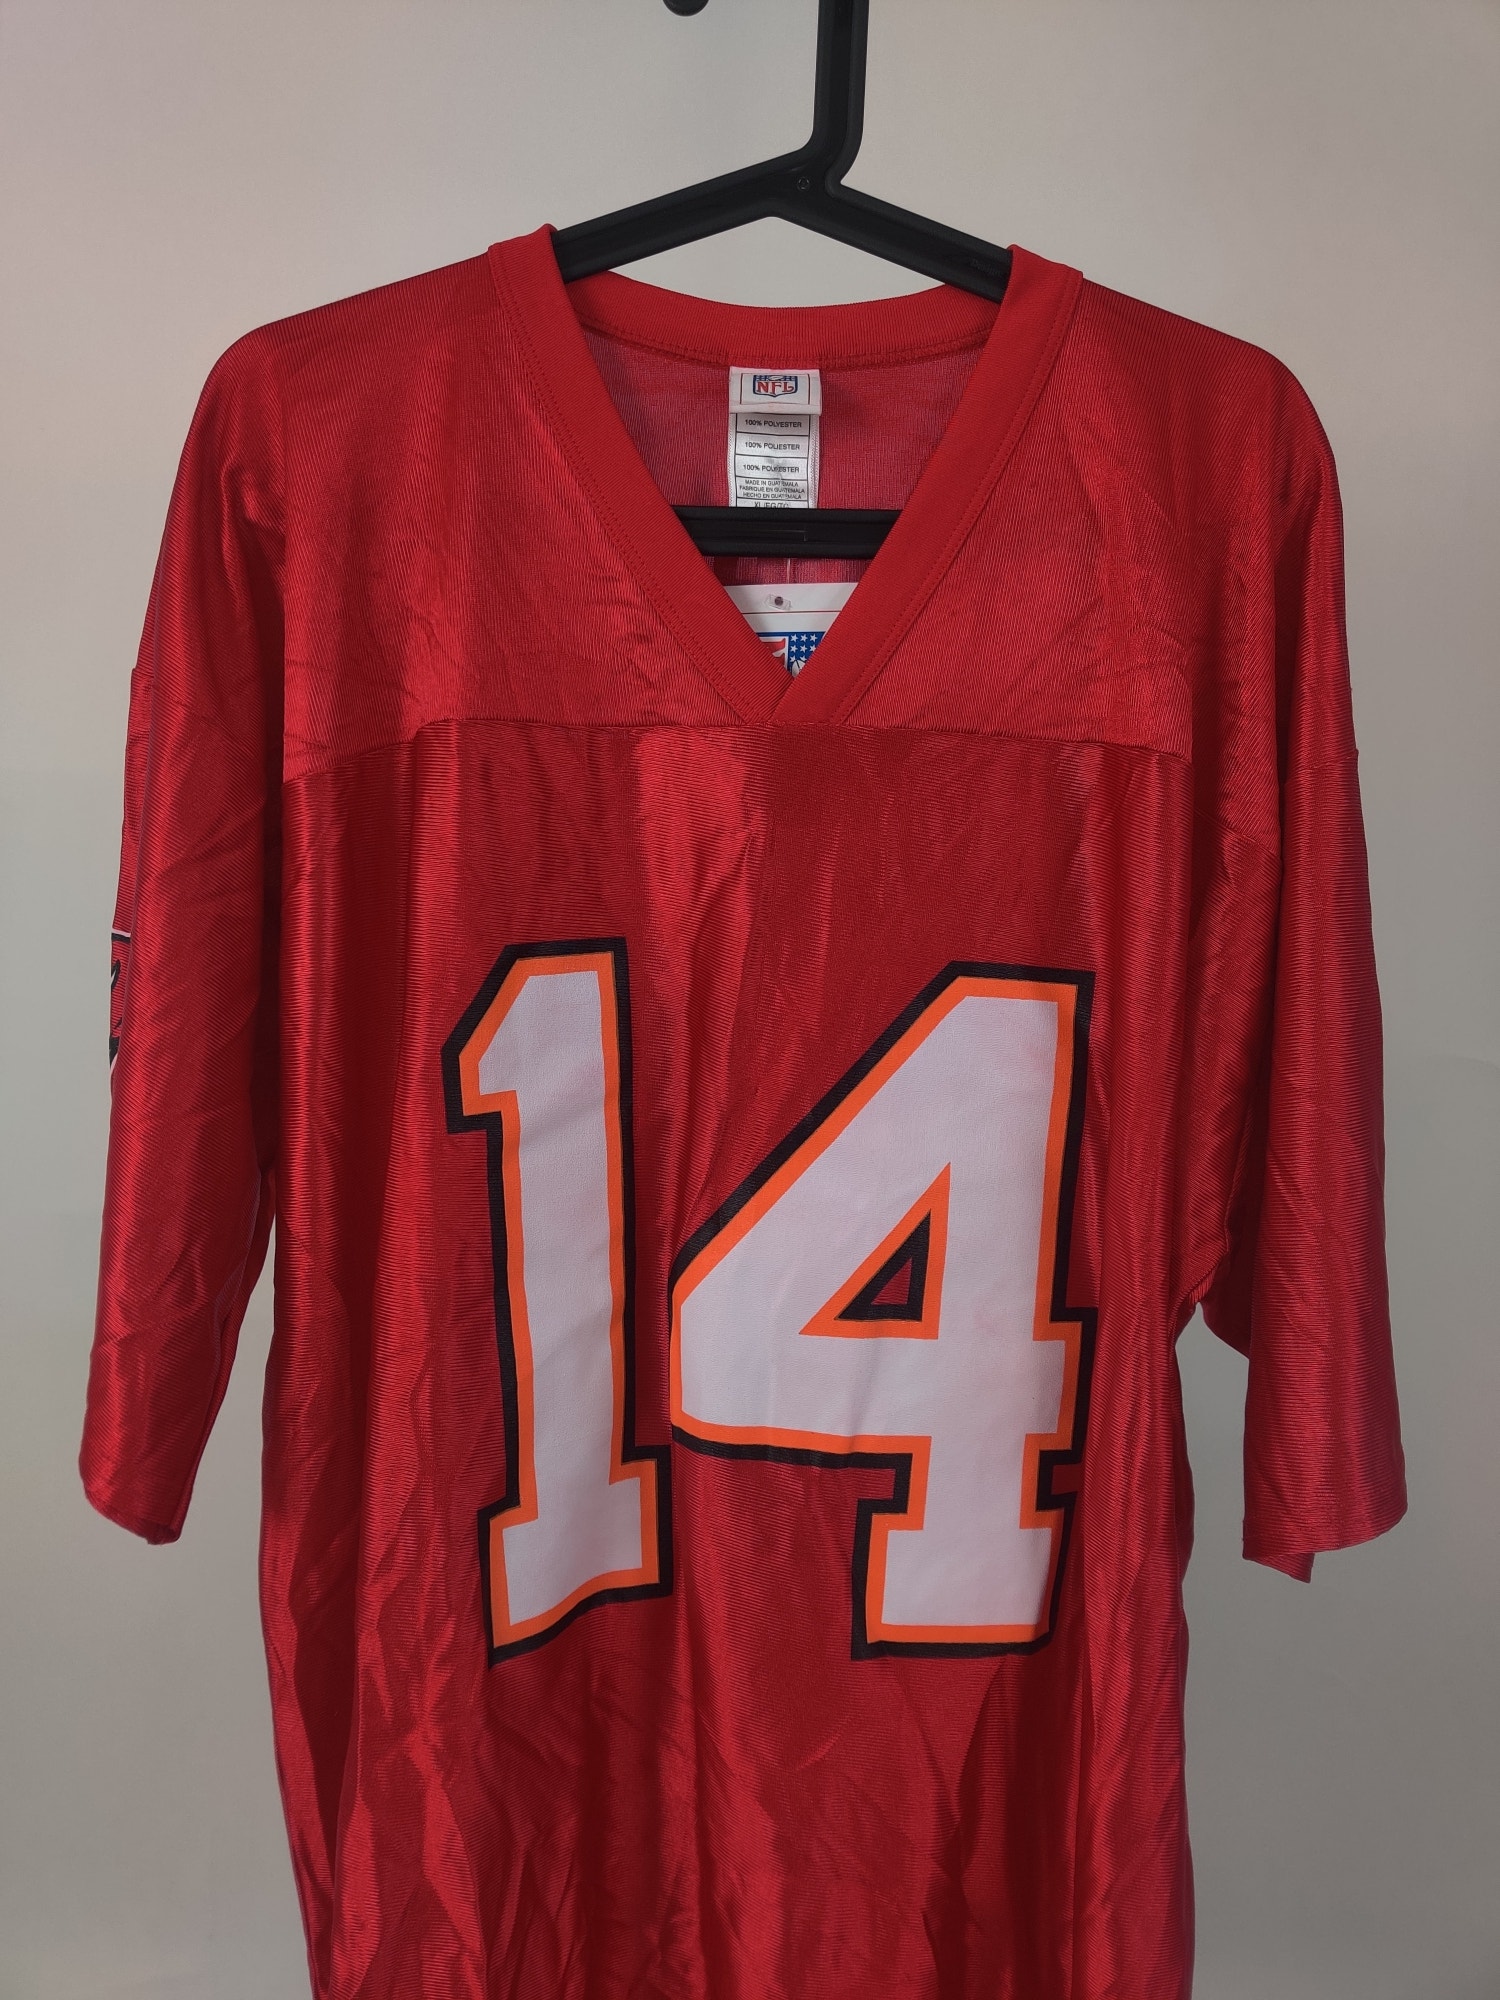 (V)NEW Tampa Bay Buccaneers B. Johnson #14 NFL Jersey Men’s XL - Picture 4 of 9